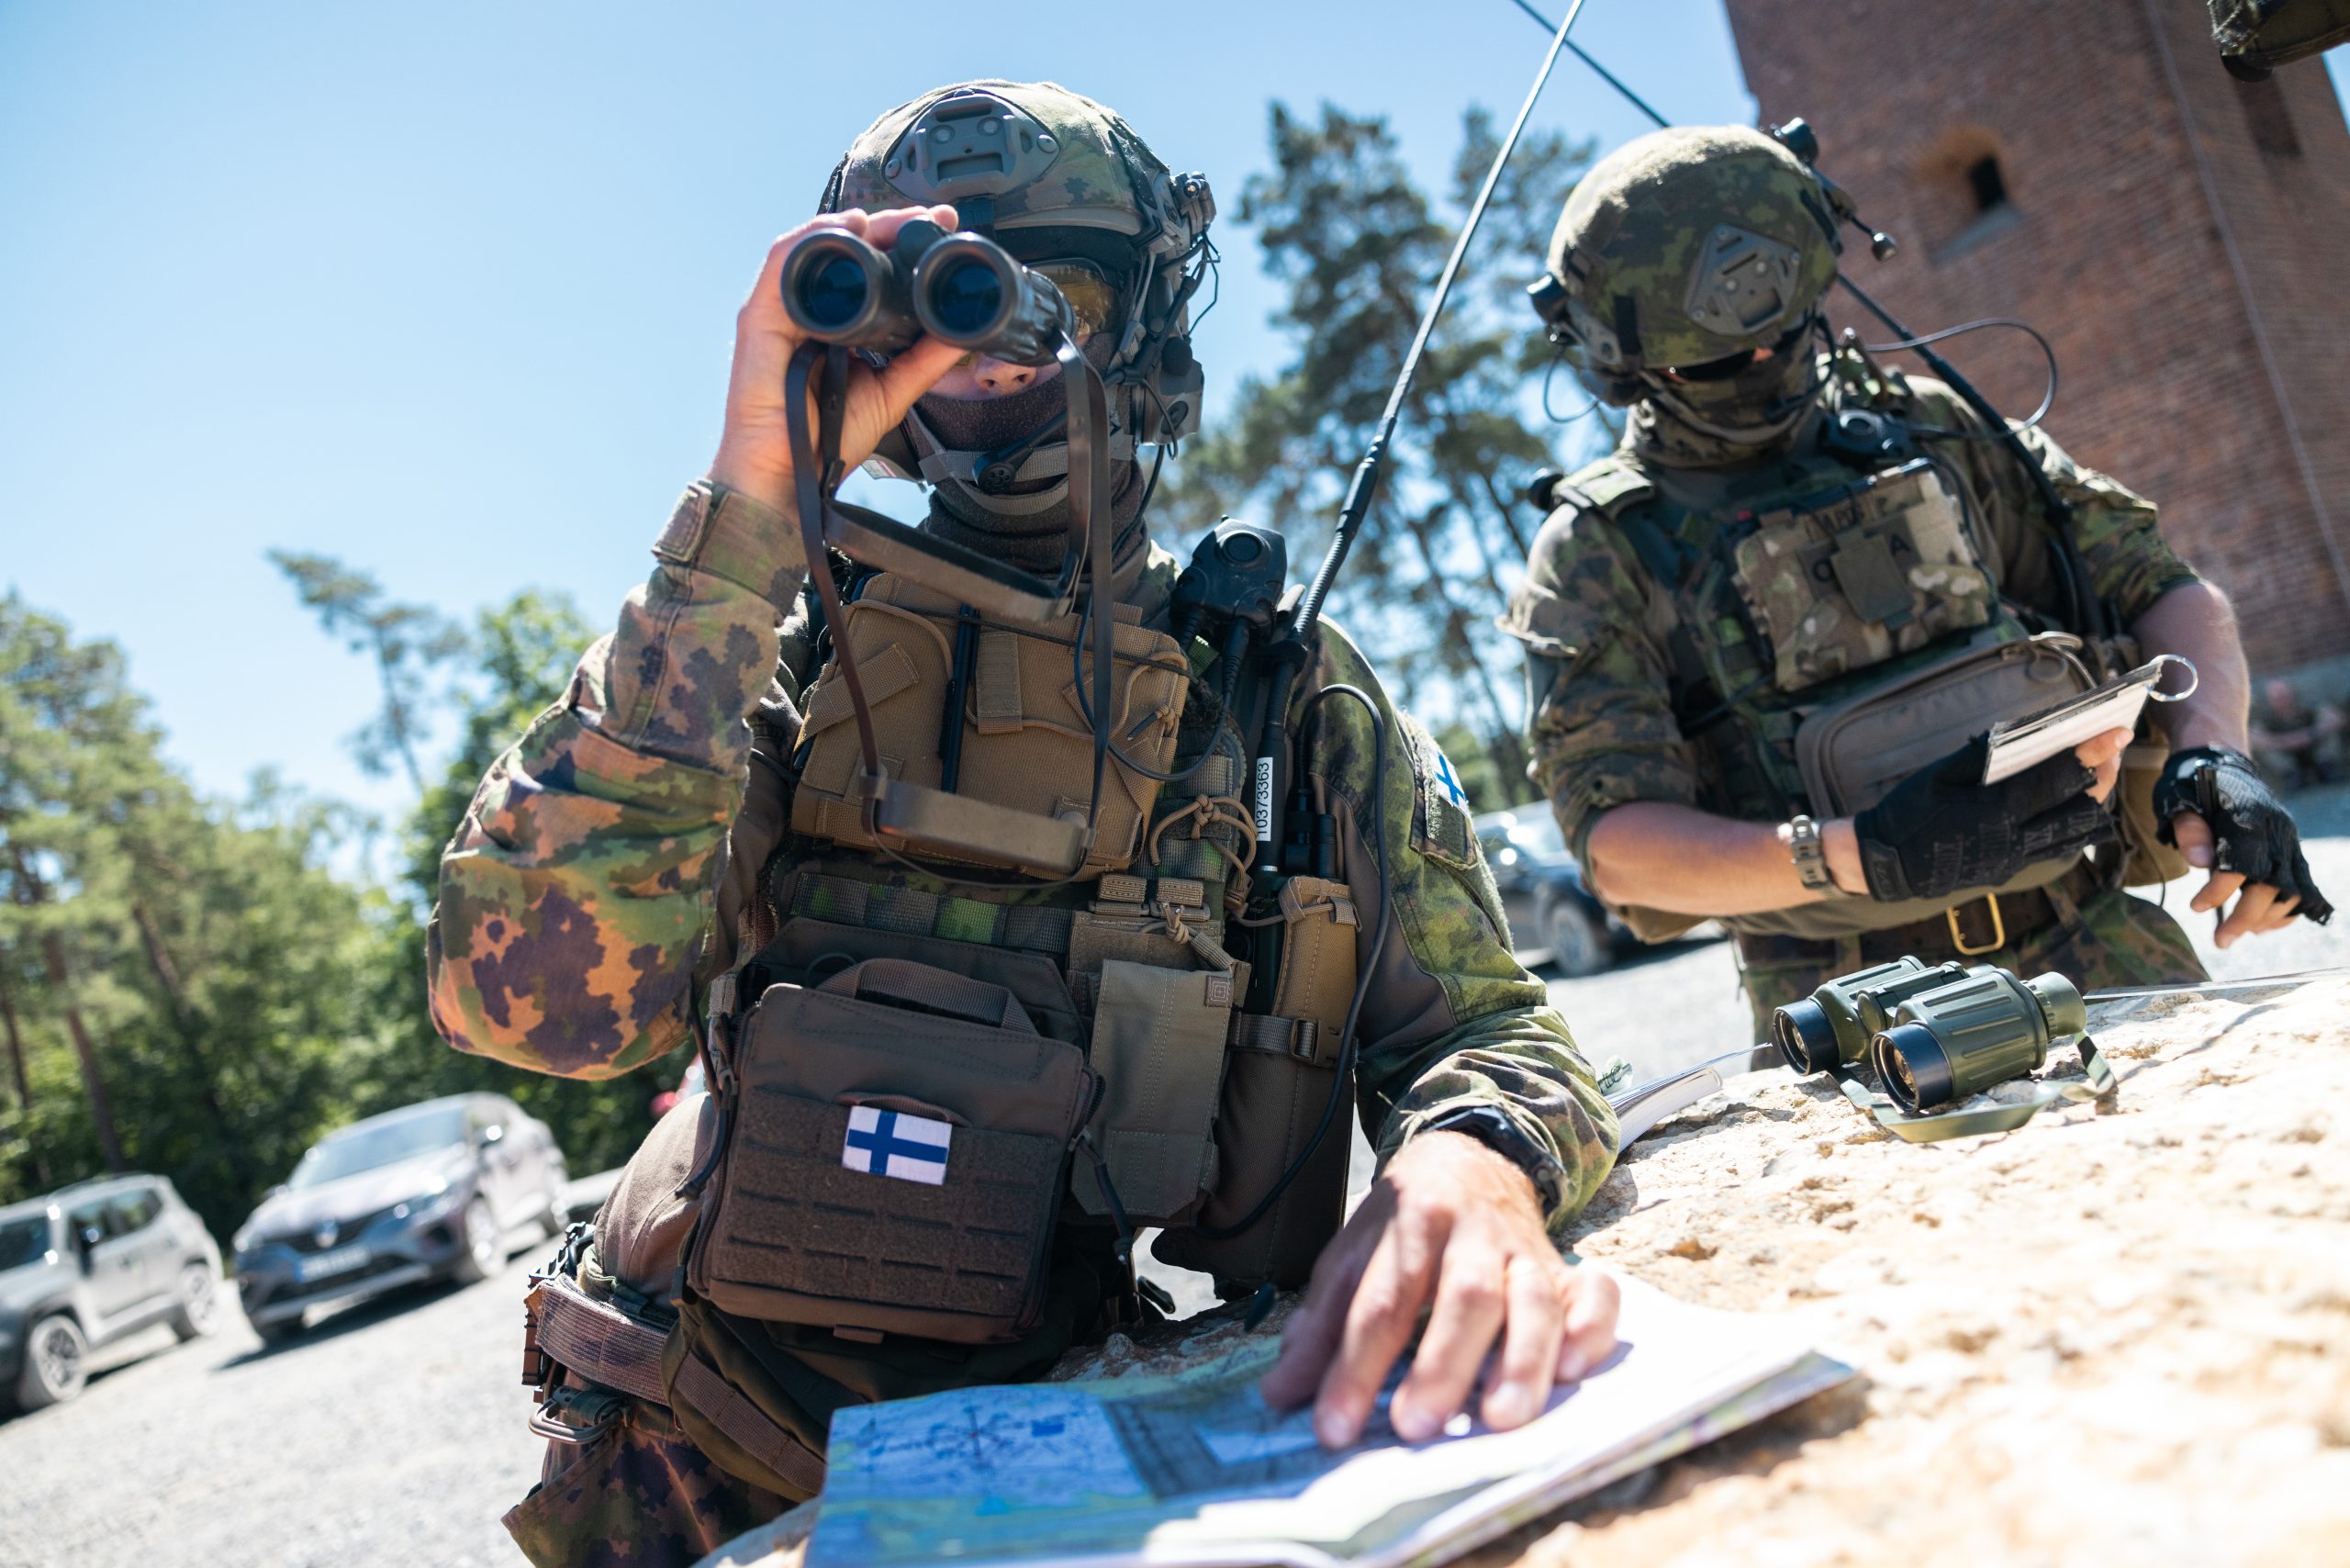 Photo: Finnish Army Joint Terminal Attack Controllers (JTACs) on 19 July 2022 in Germany during Exercise Dynamic Front 22. Credit: NATO via Flickr. https://flic.kr/p/2nAx6RA